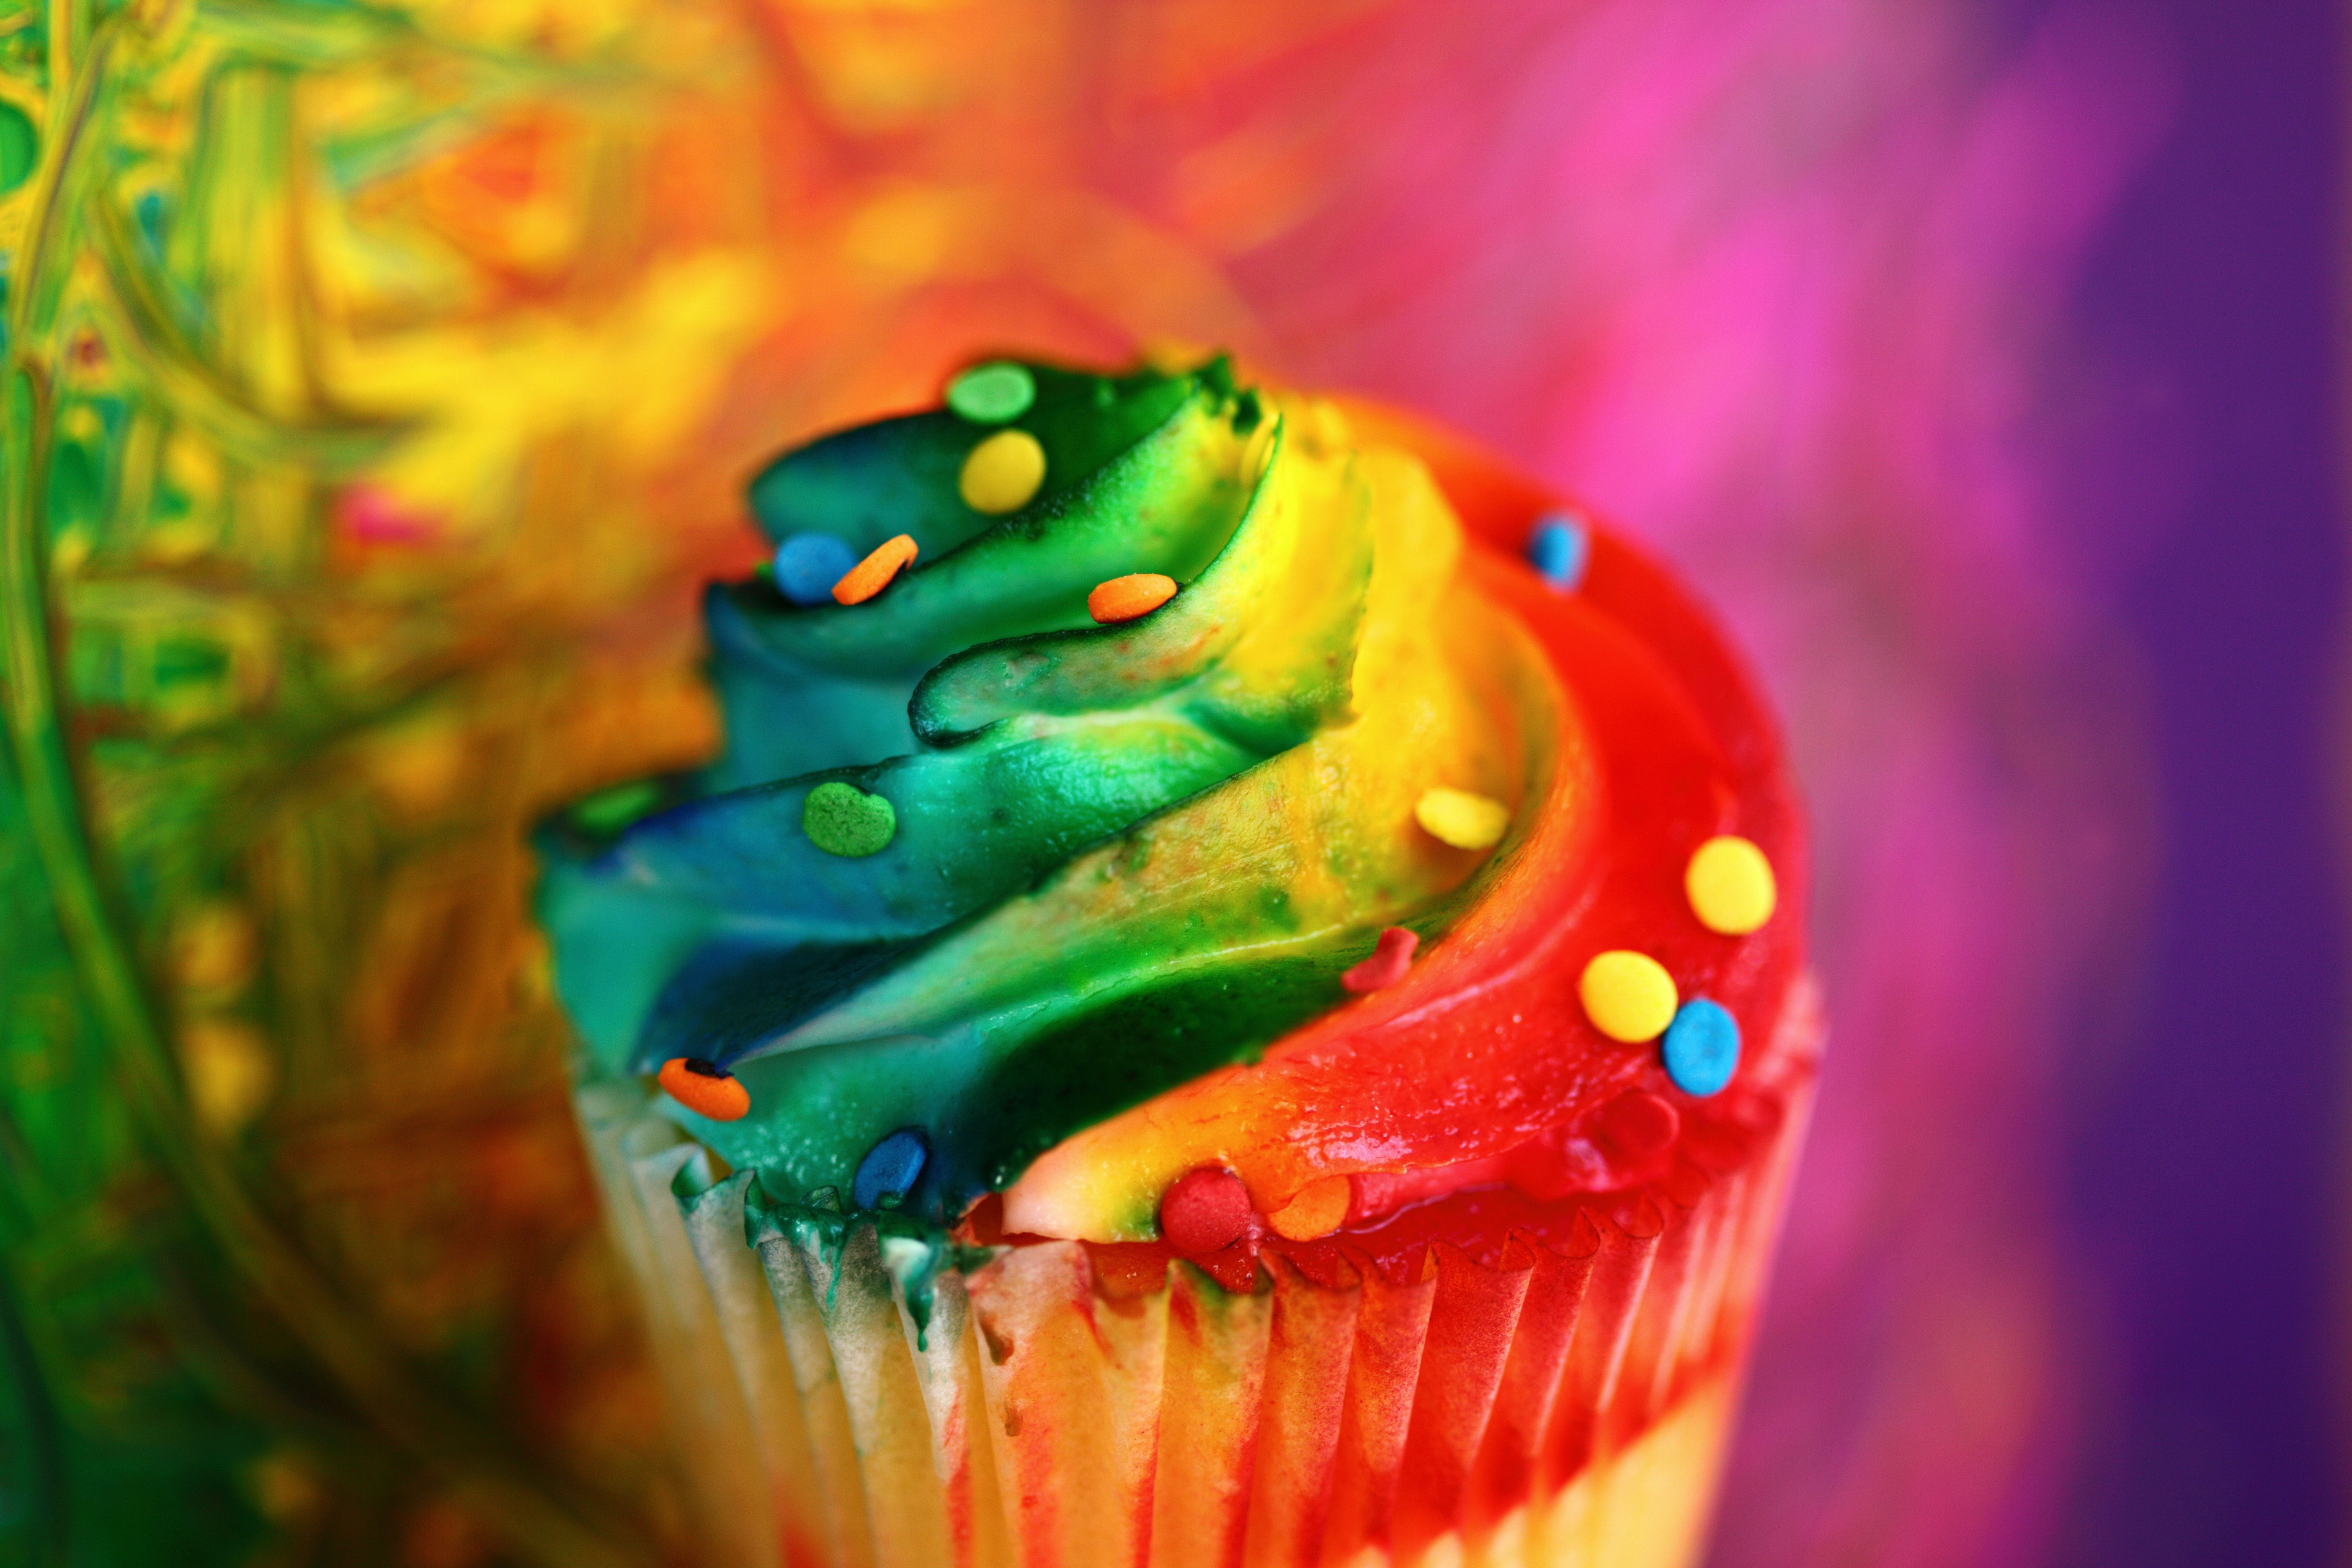 A cupcake with sprinkles and frosting on it - Cupcakes, colorful